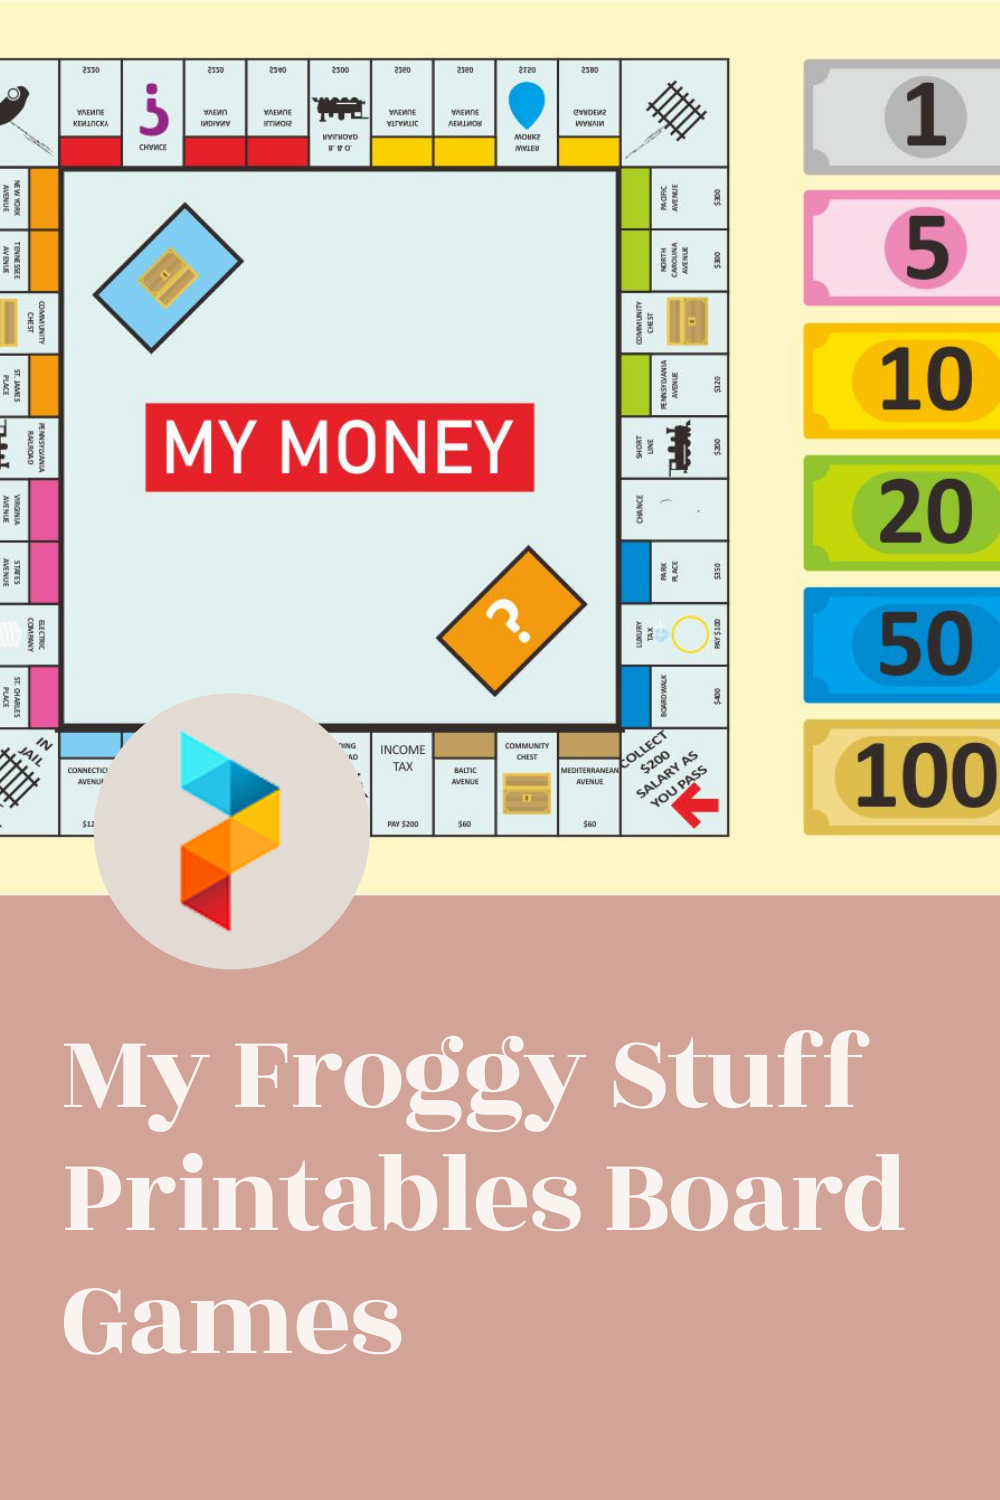 My Froggy Stuff Printables Board Games